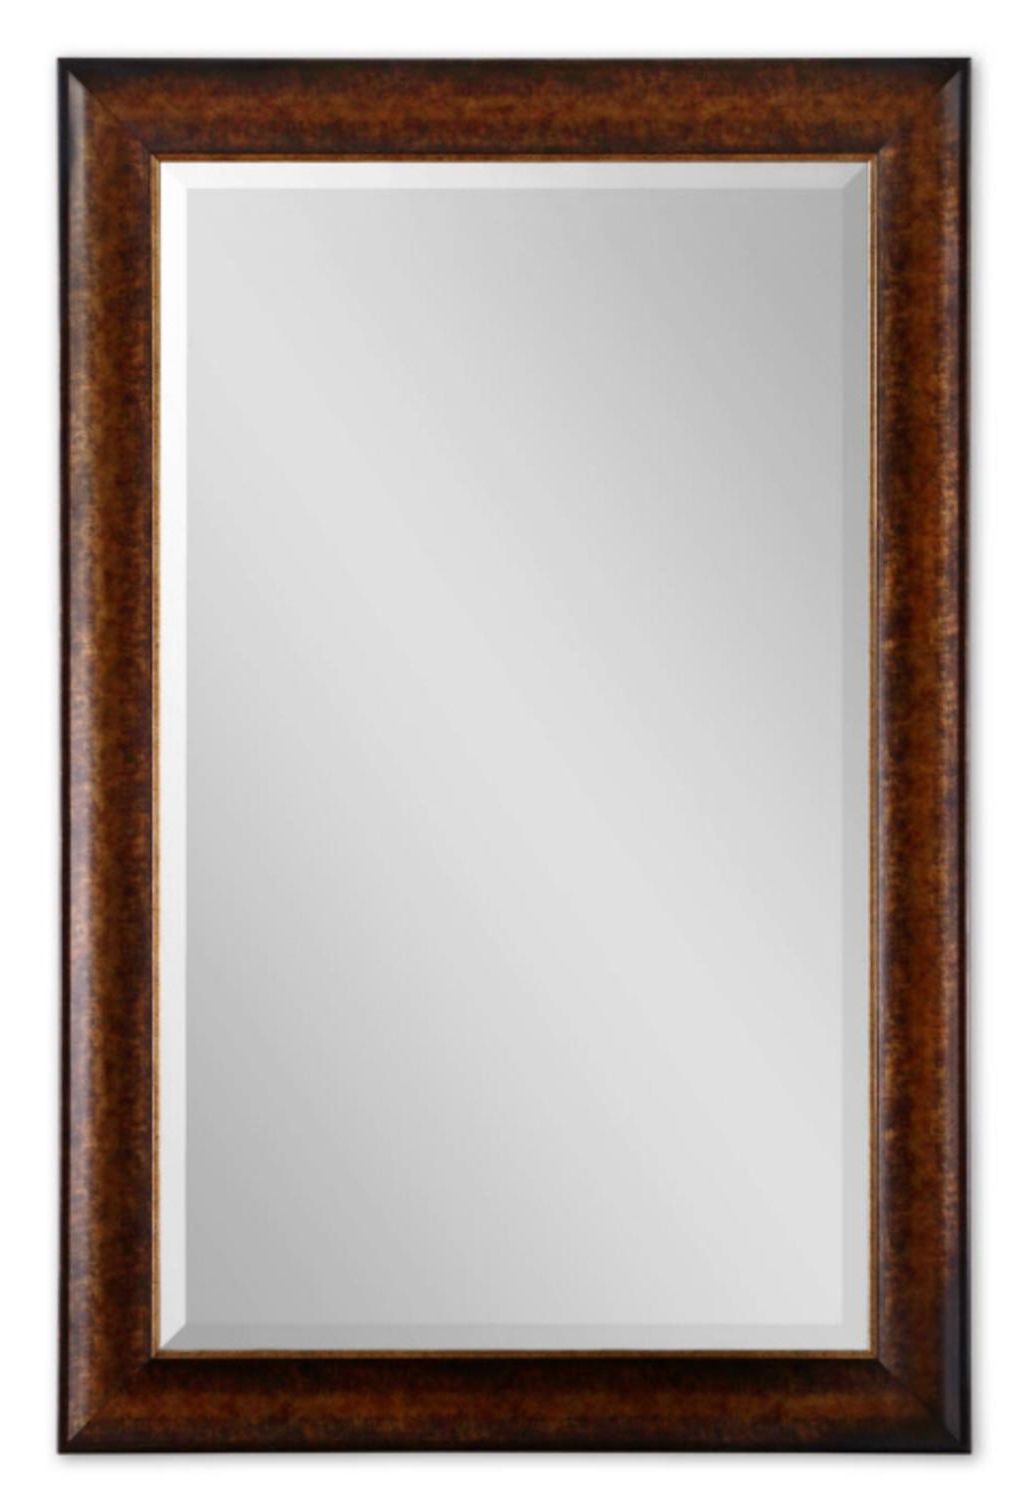 Current 58" Rustic Bronze With Silver Tones Framed Beveled Rectangular Wall Pertaining To Silver Beveled Wall Mirrors (View 7 of 15)